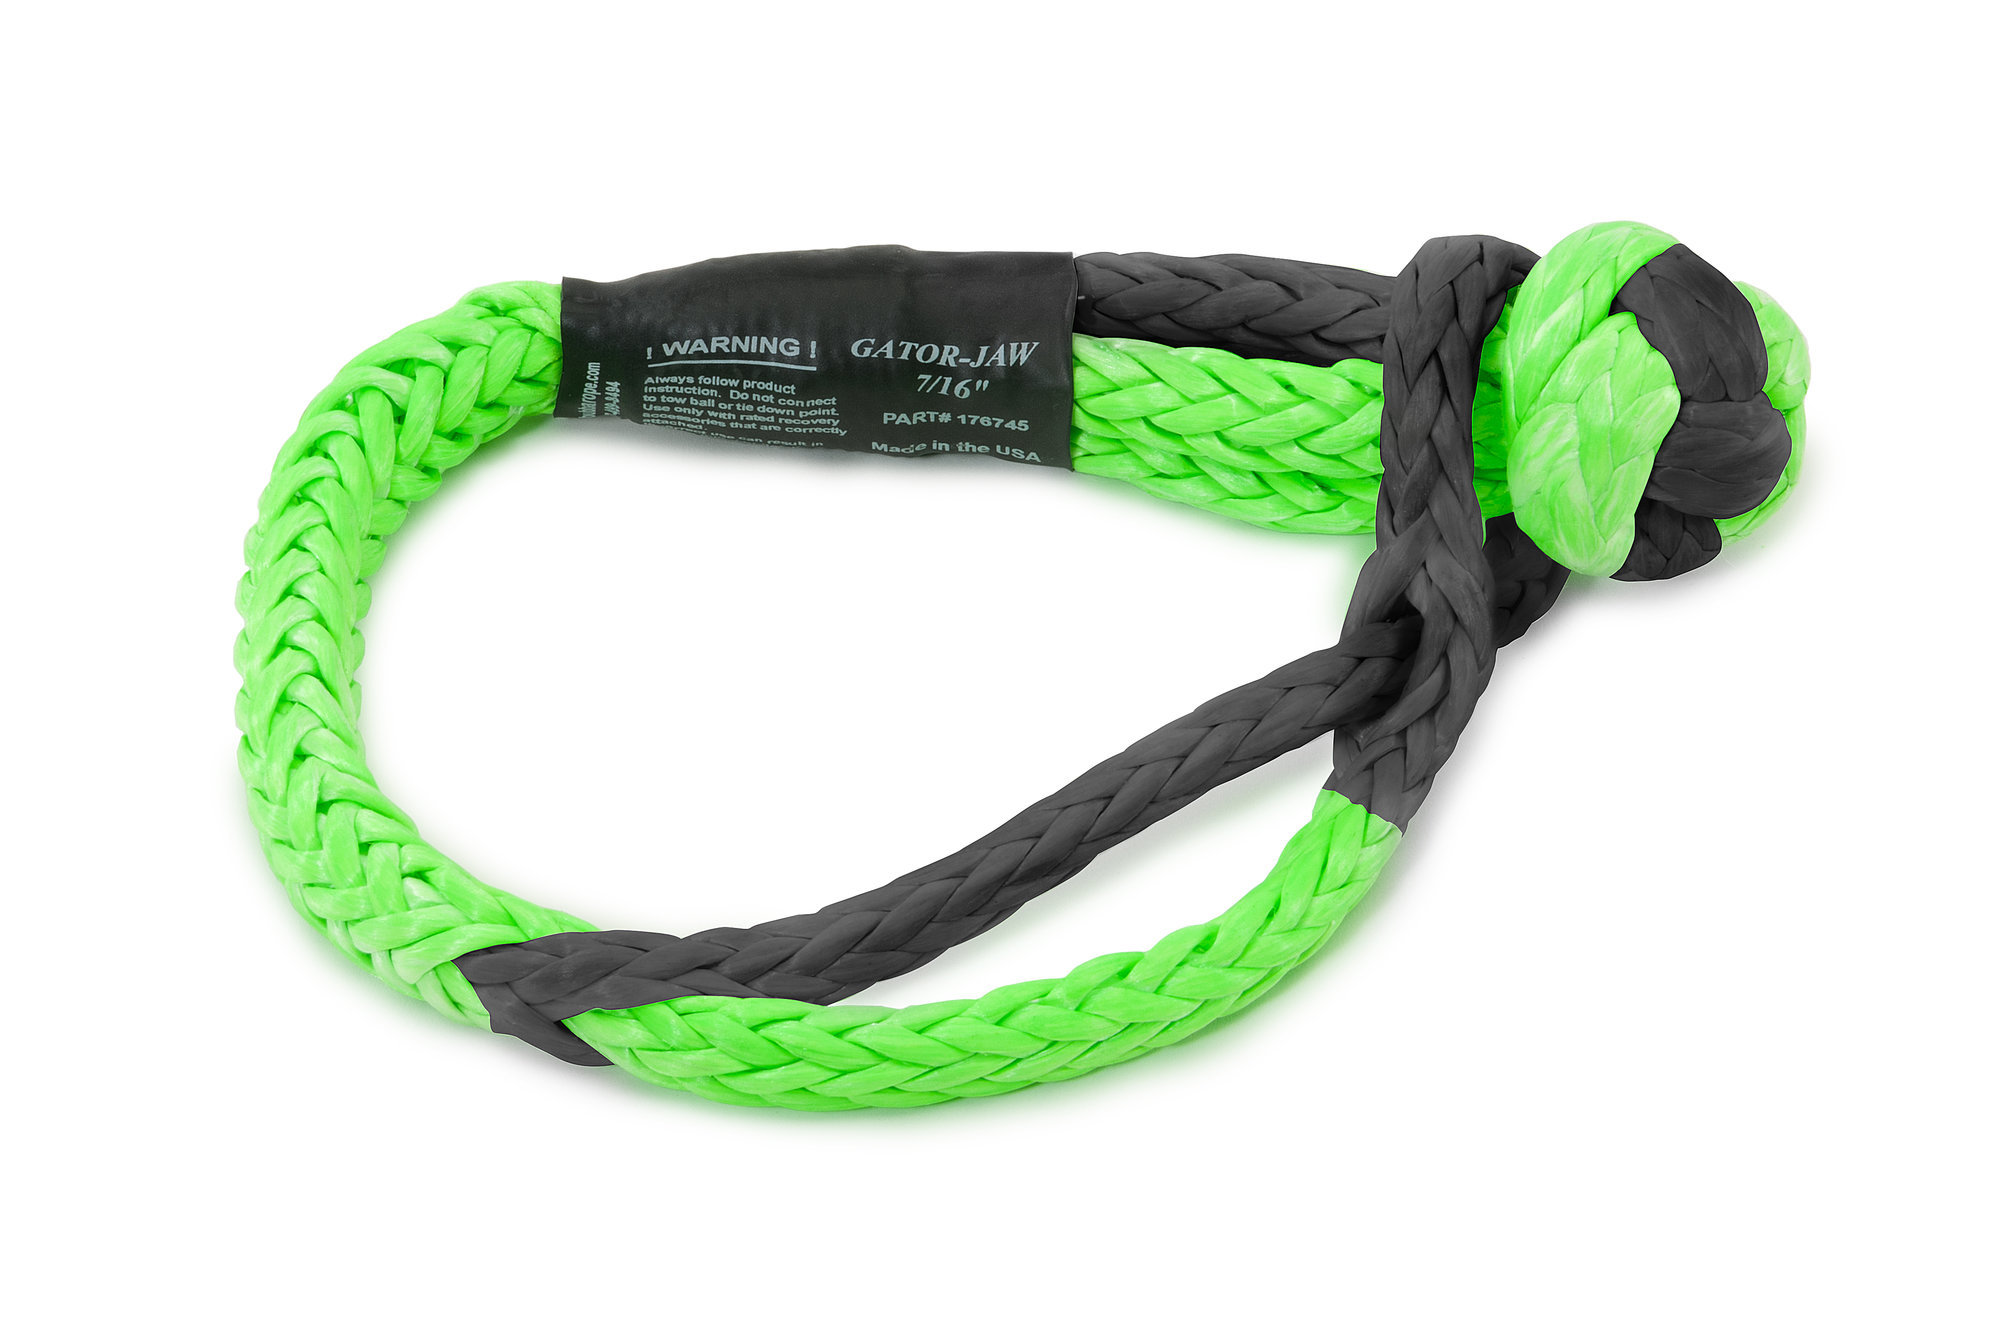 Bubba Rope 176745 GATORJAW SFT SHACKLE 7/16 by Bubba Rope 